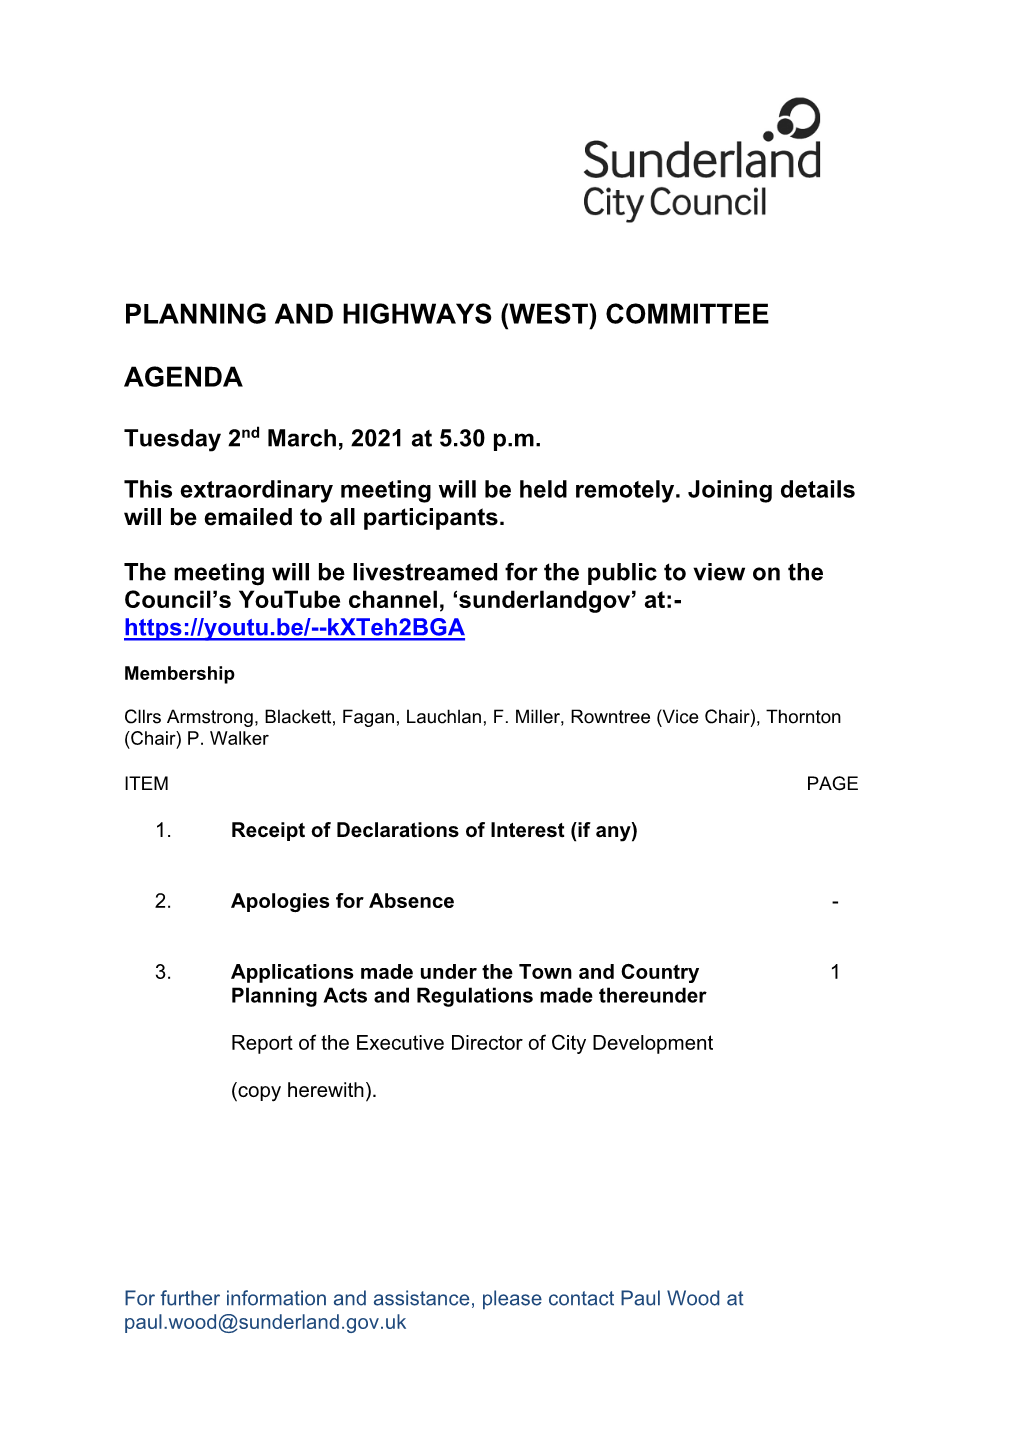 Planning and Highways (West) Committee